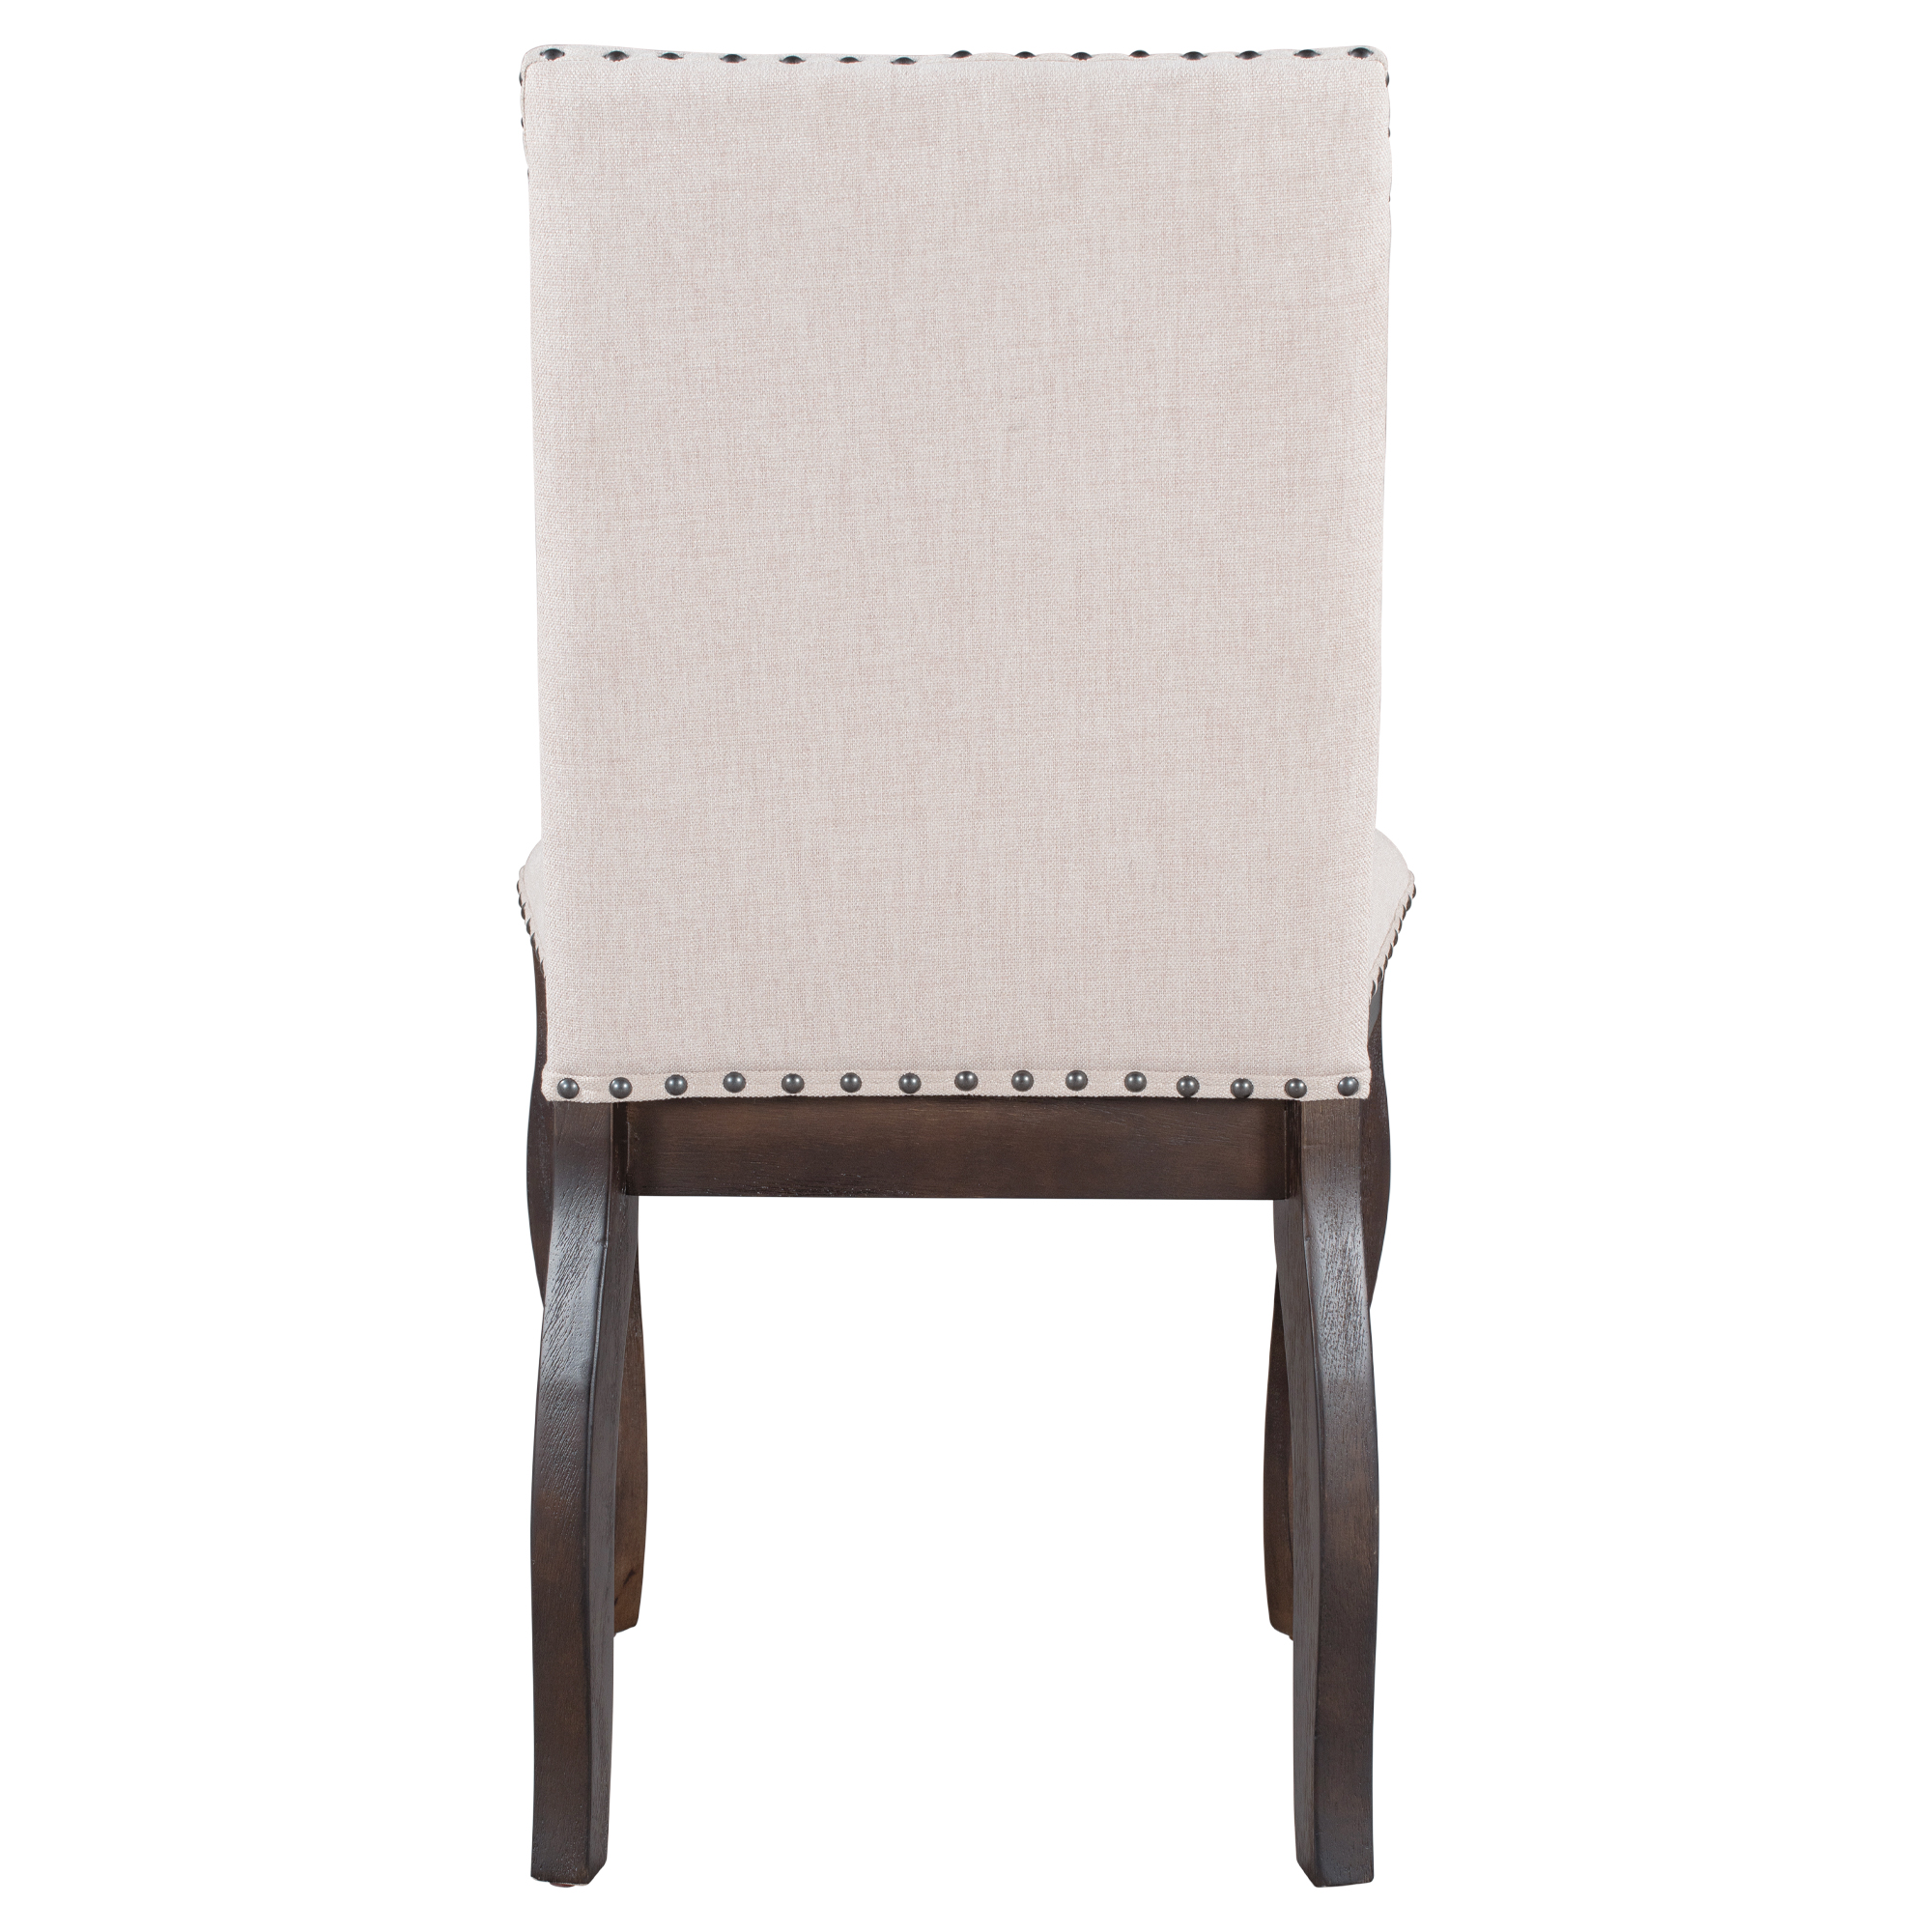 Wood Upholstered Fabric Dining Room Chairs with Nailhead - WF291264AAP